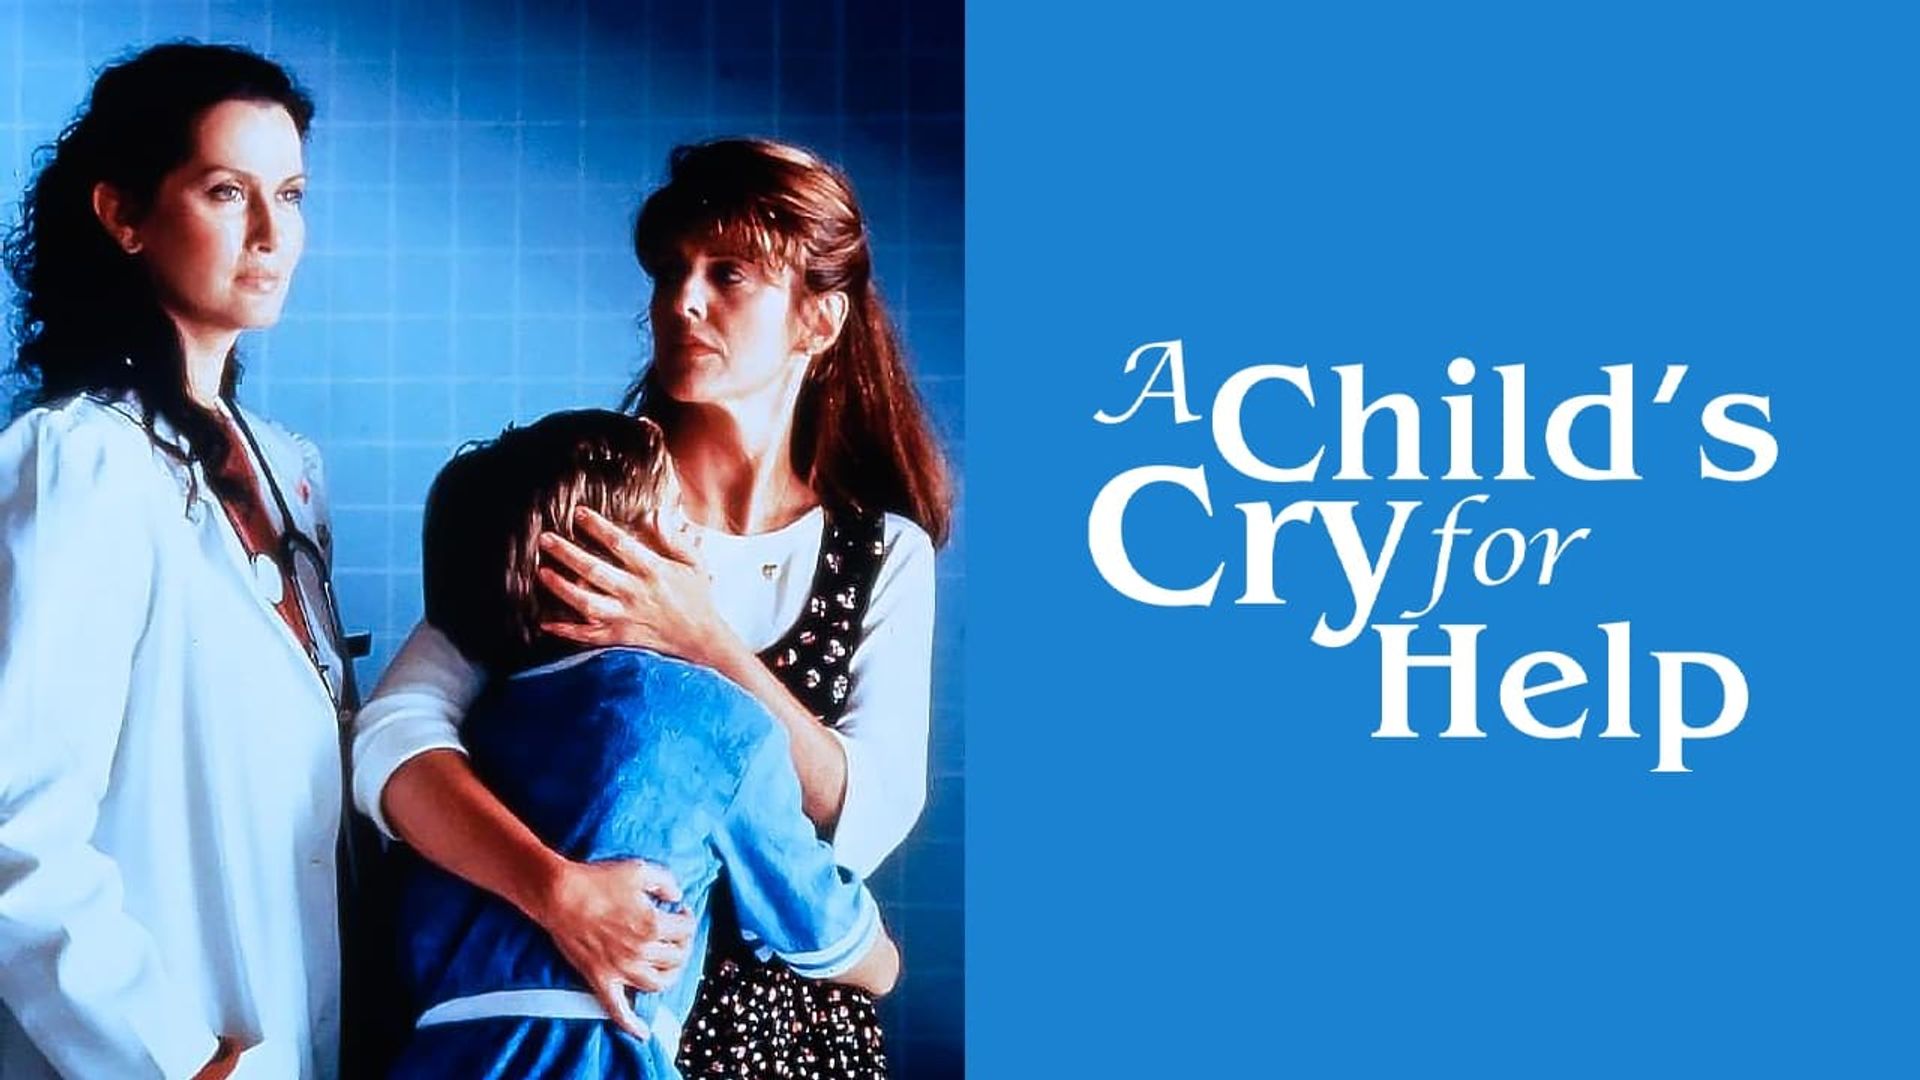 A Child's Cry for Help background